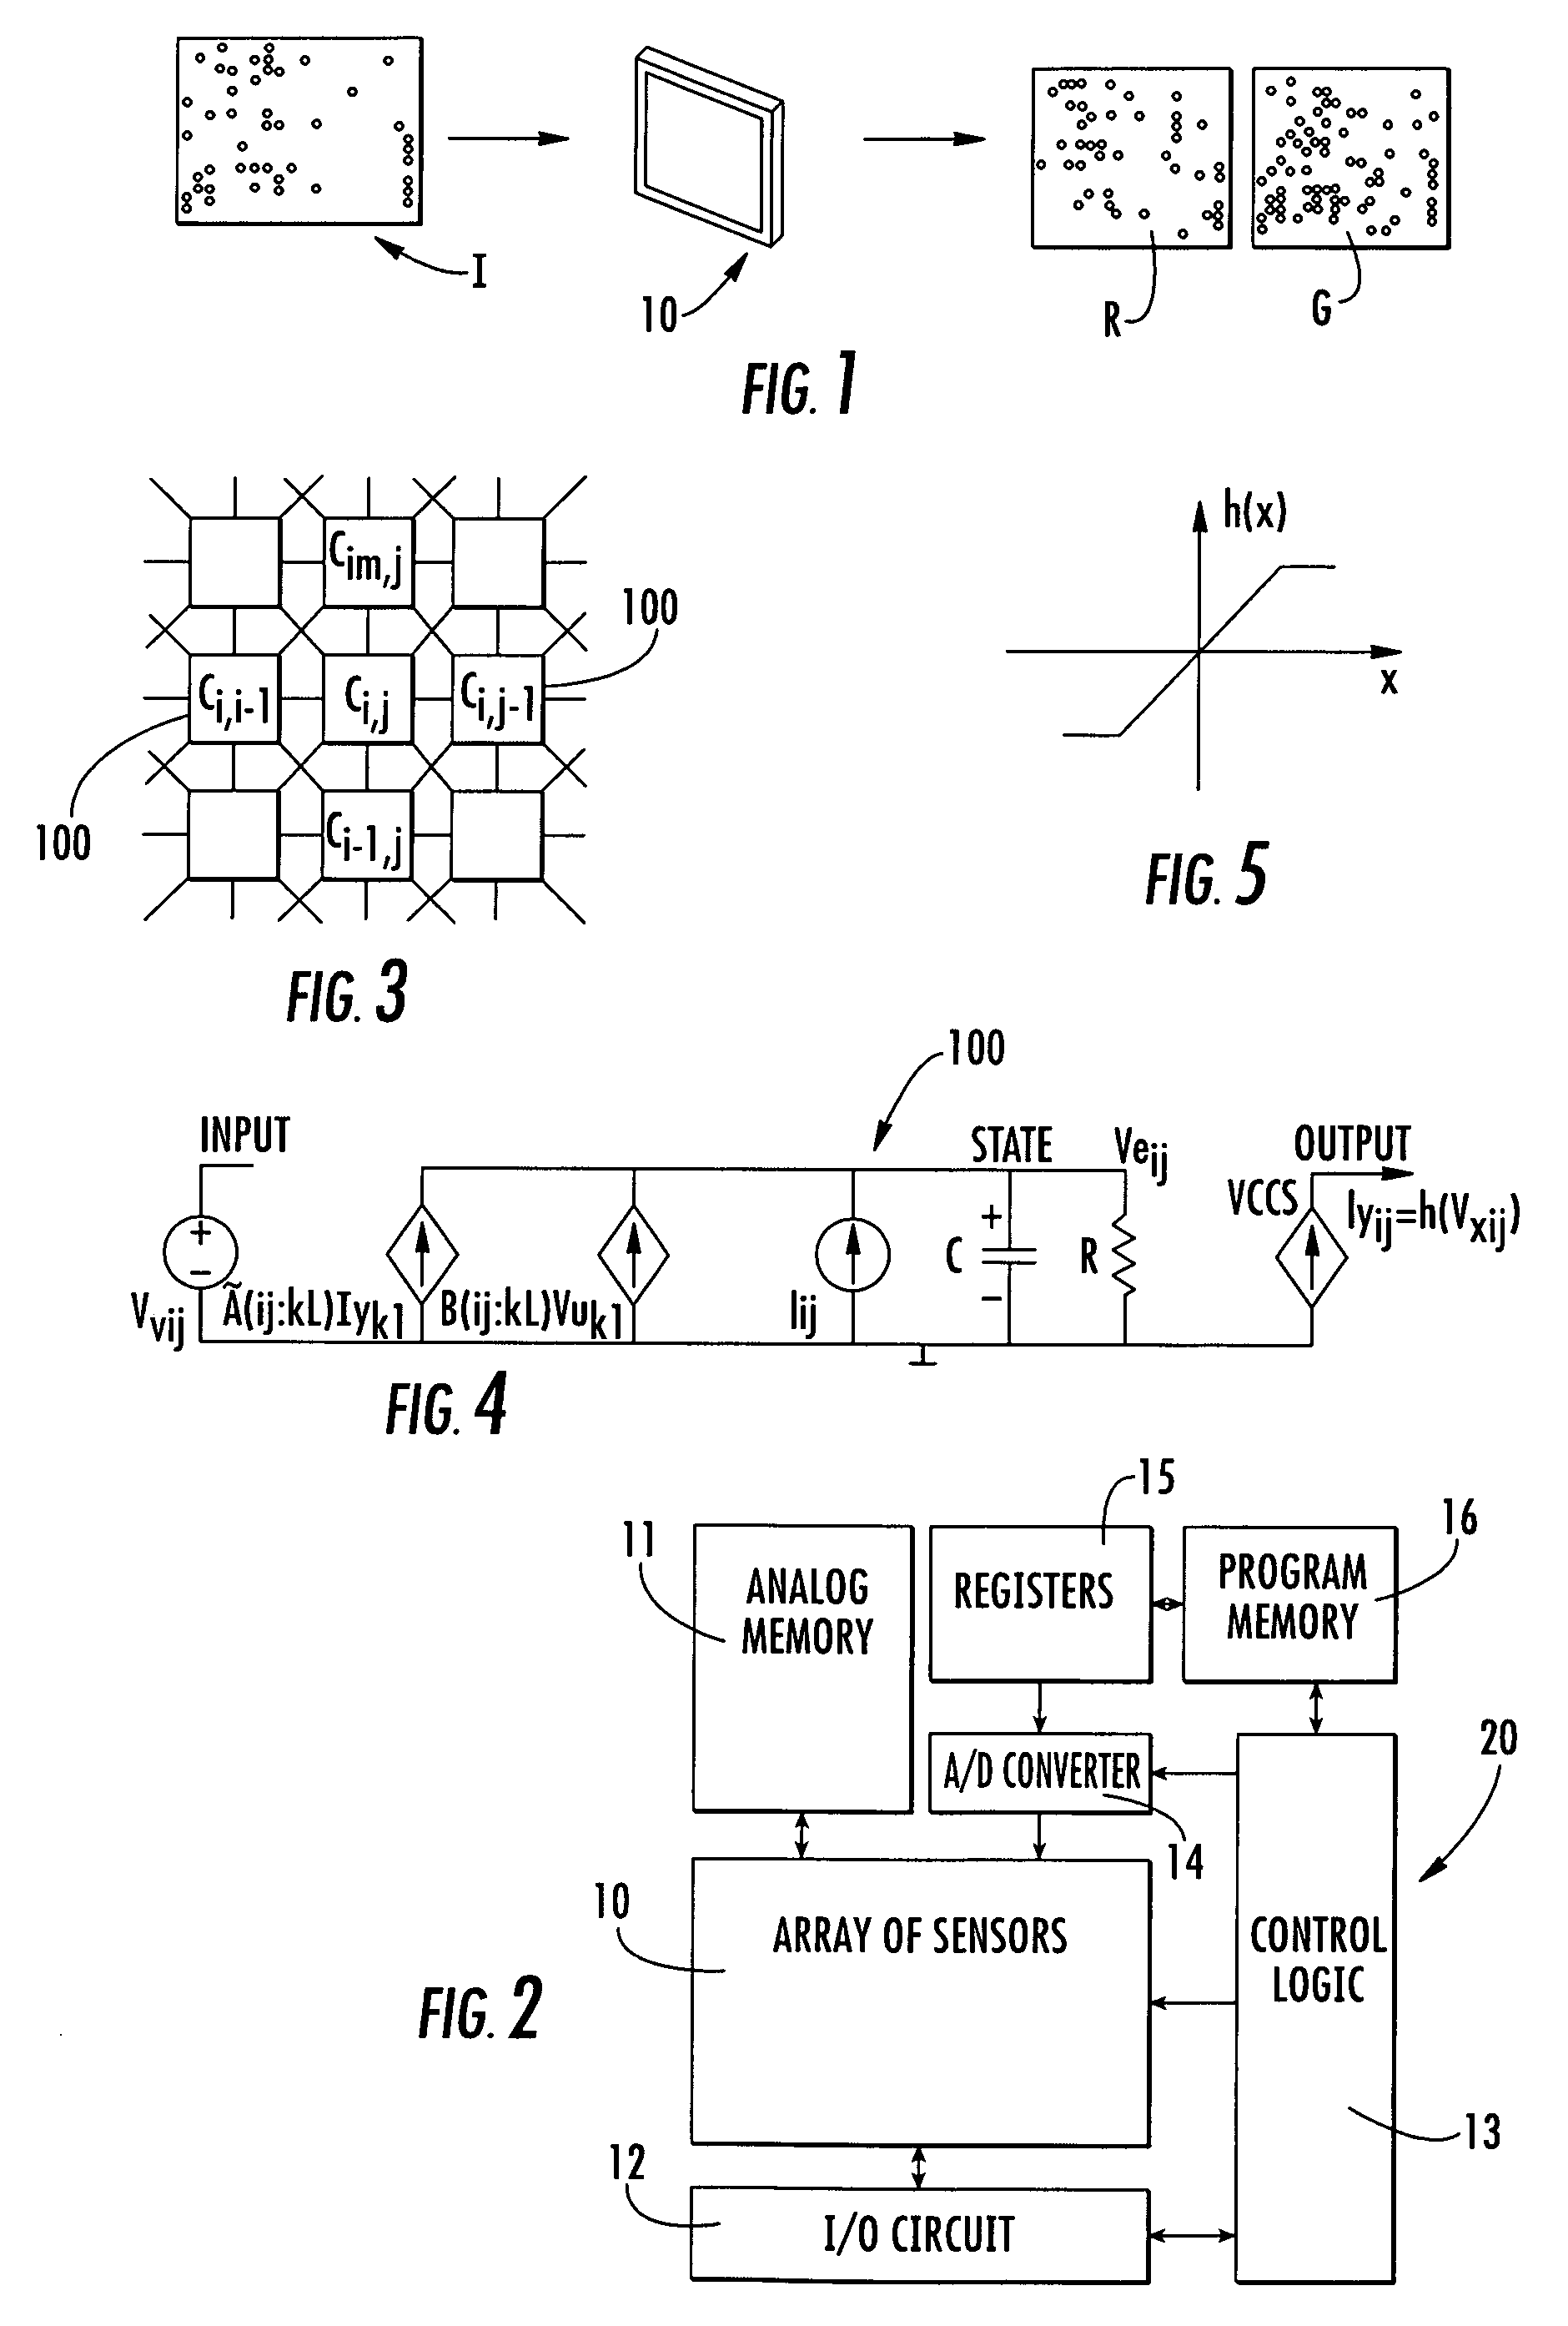 System for the automatic analysis of images such as DNA microarray images